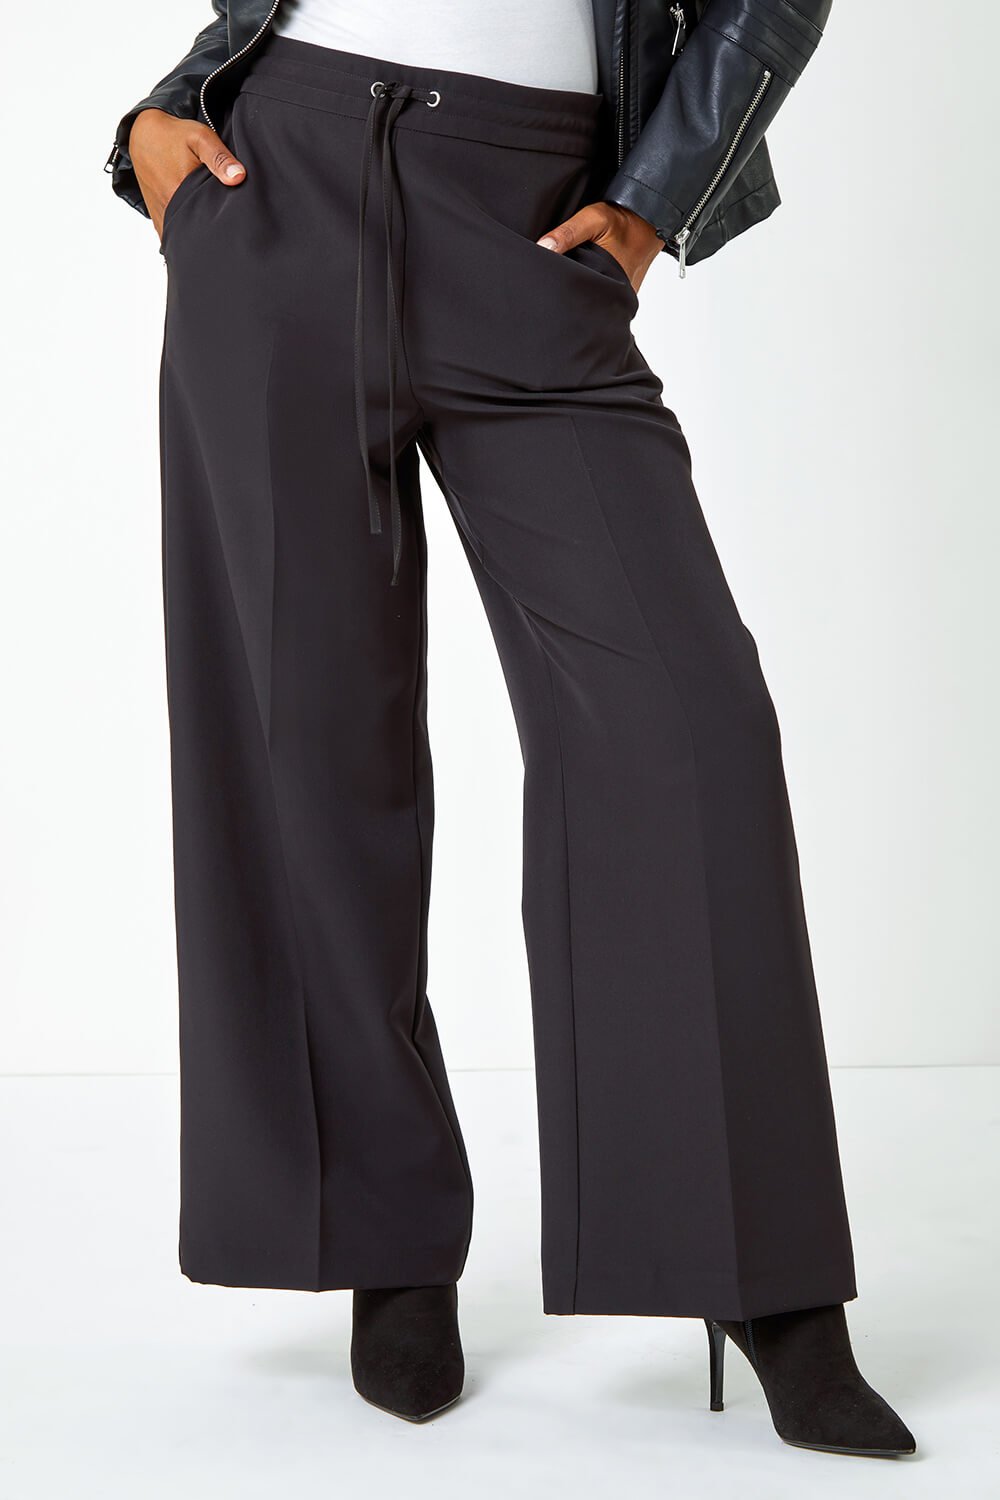 Black Petite Wide Leg Stretch Trousers, Image 4 of 5